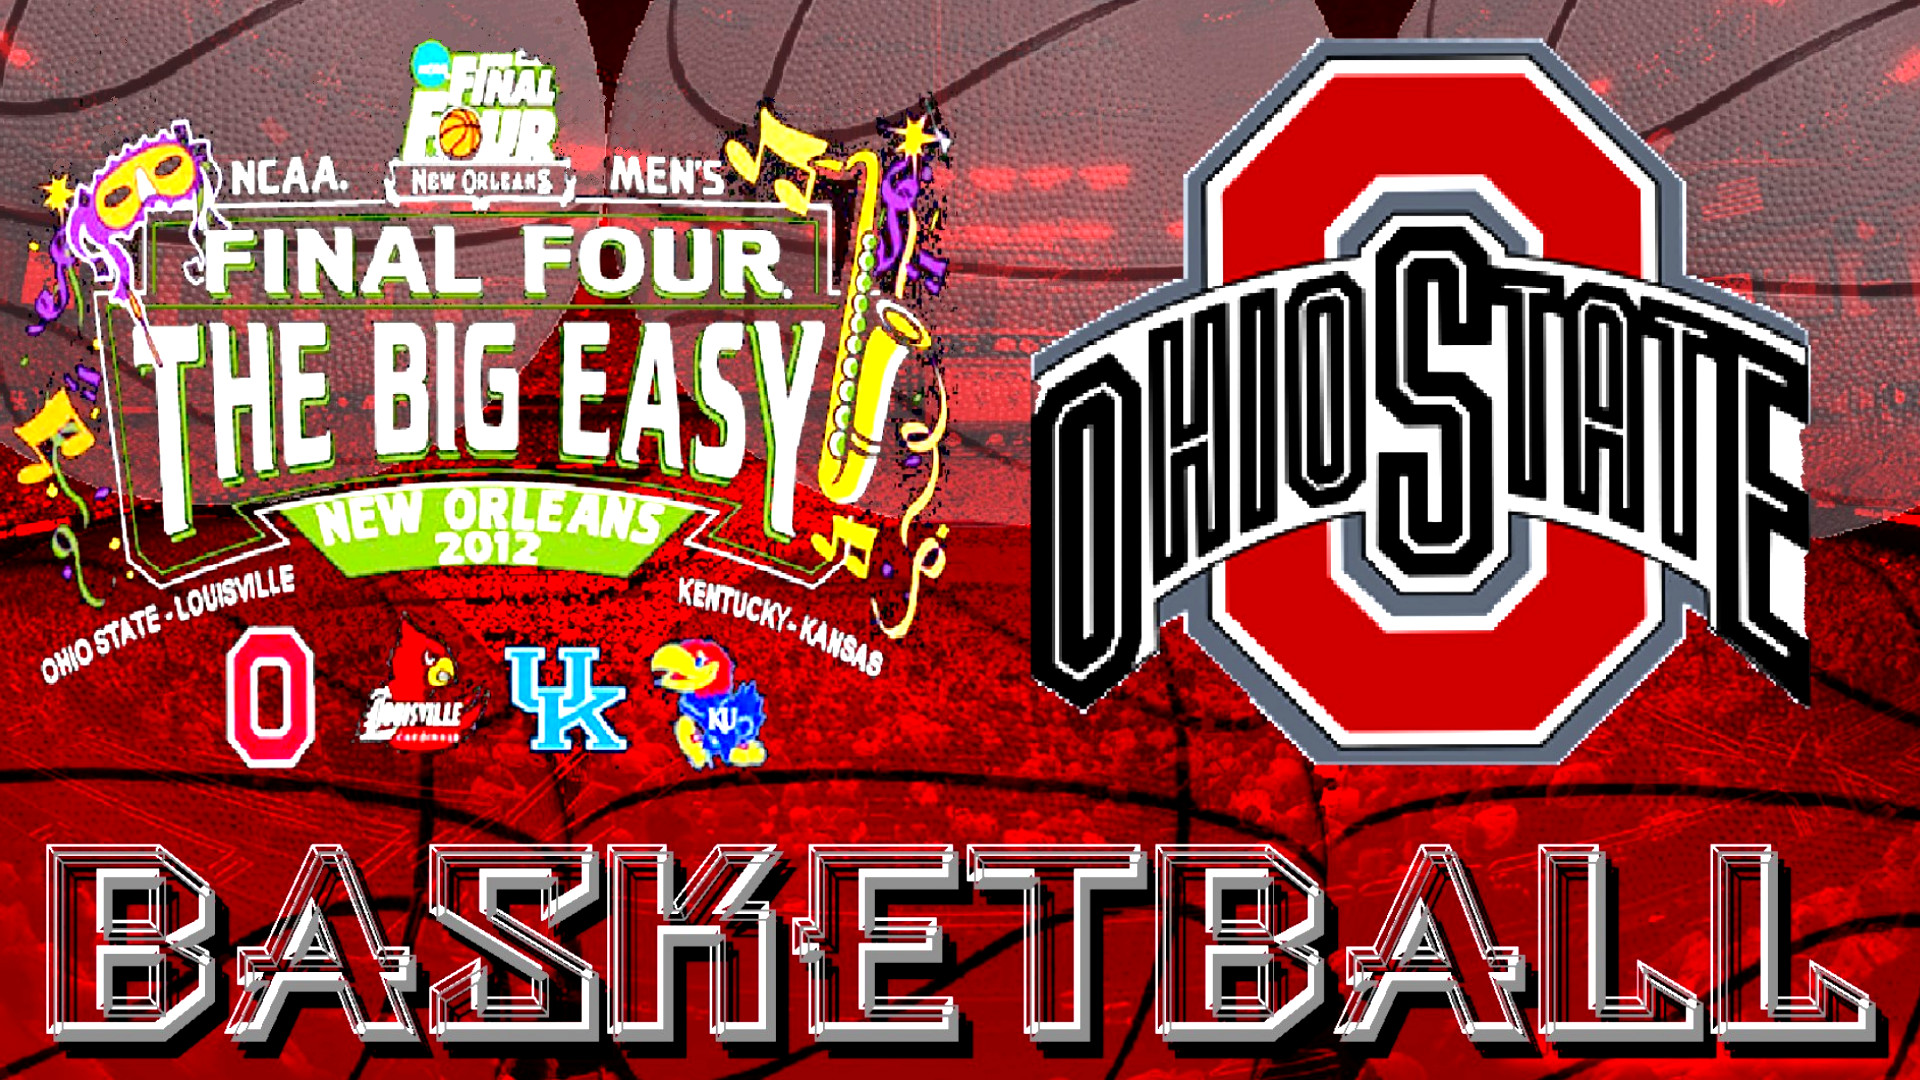 1920x1080 Ohio State University Basketball images OHIO STATE 2012 NCAA FINAL 4 NOLA HD  wallpaper and background photos